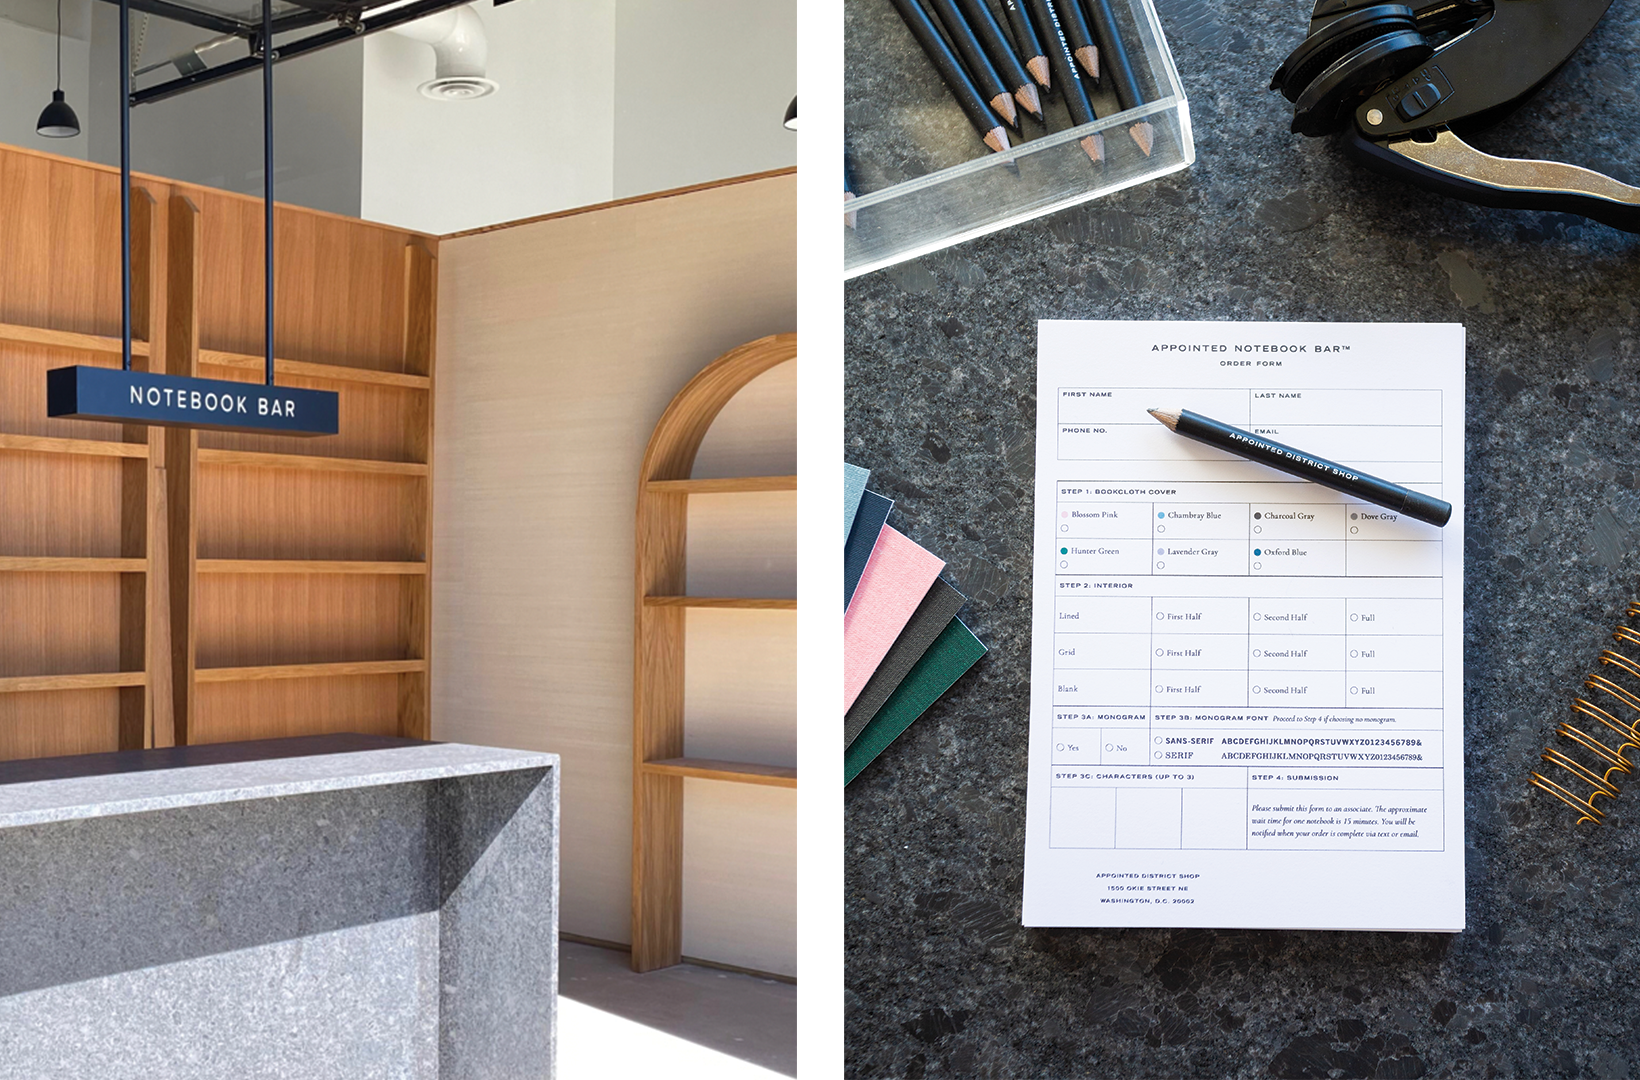 Left: A sneak peak at the Appointed District Shop displays & interior; Right: The Notebook Bar™ order form with sample materials on display